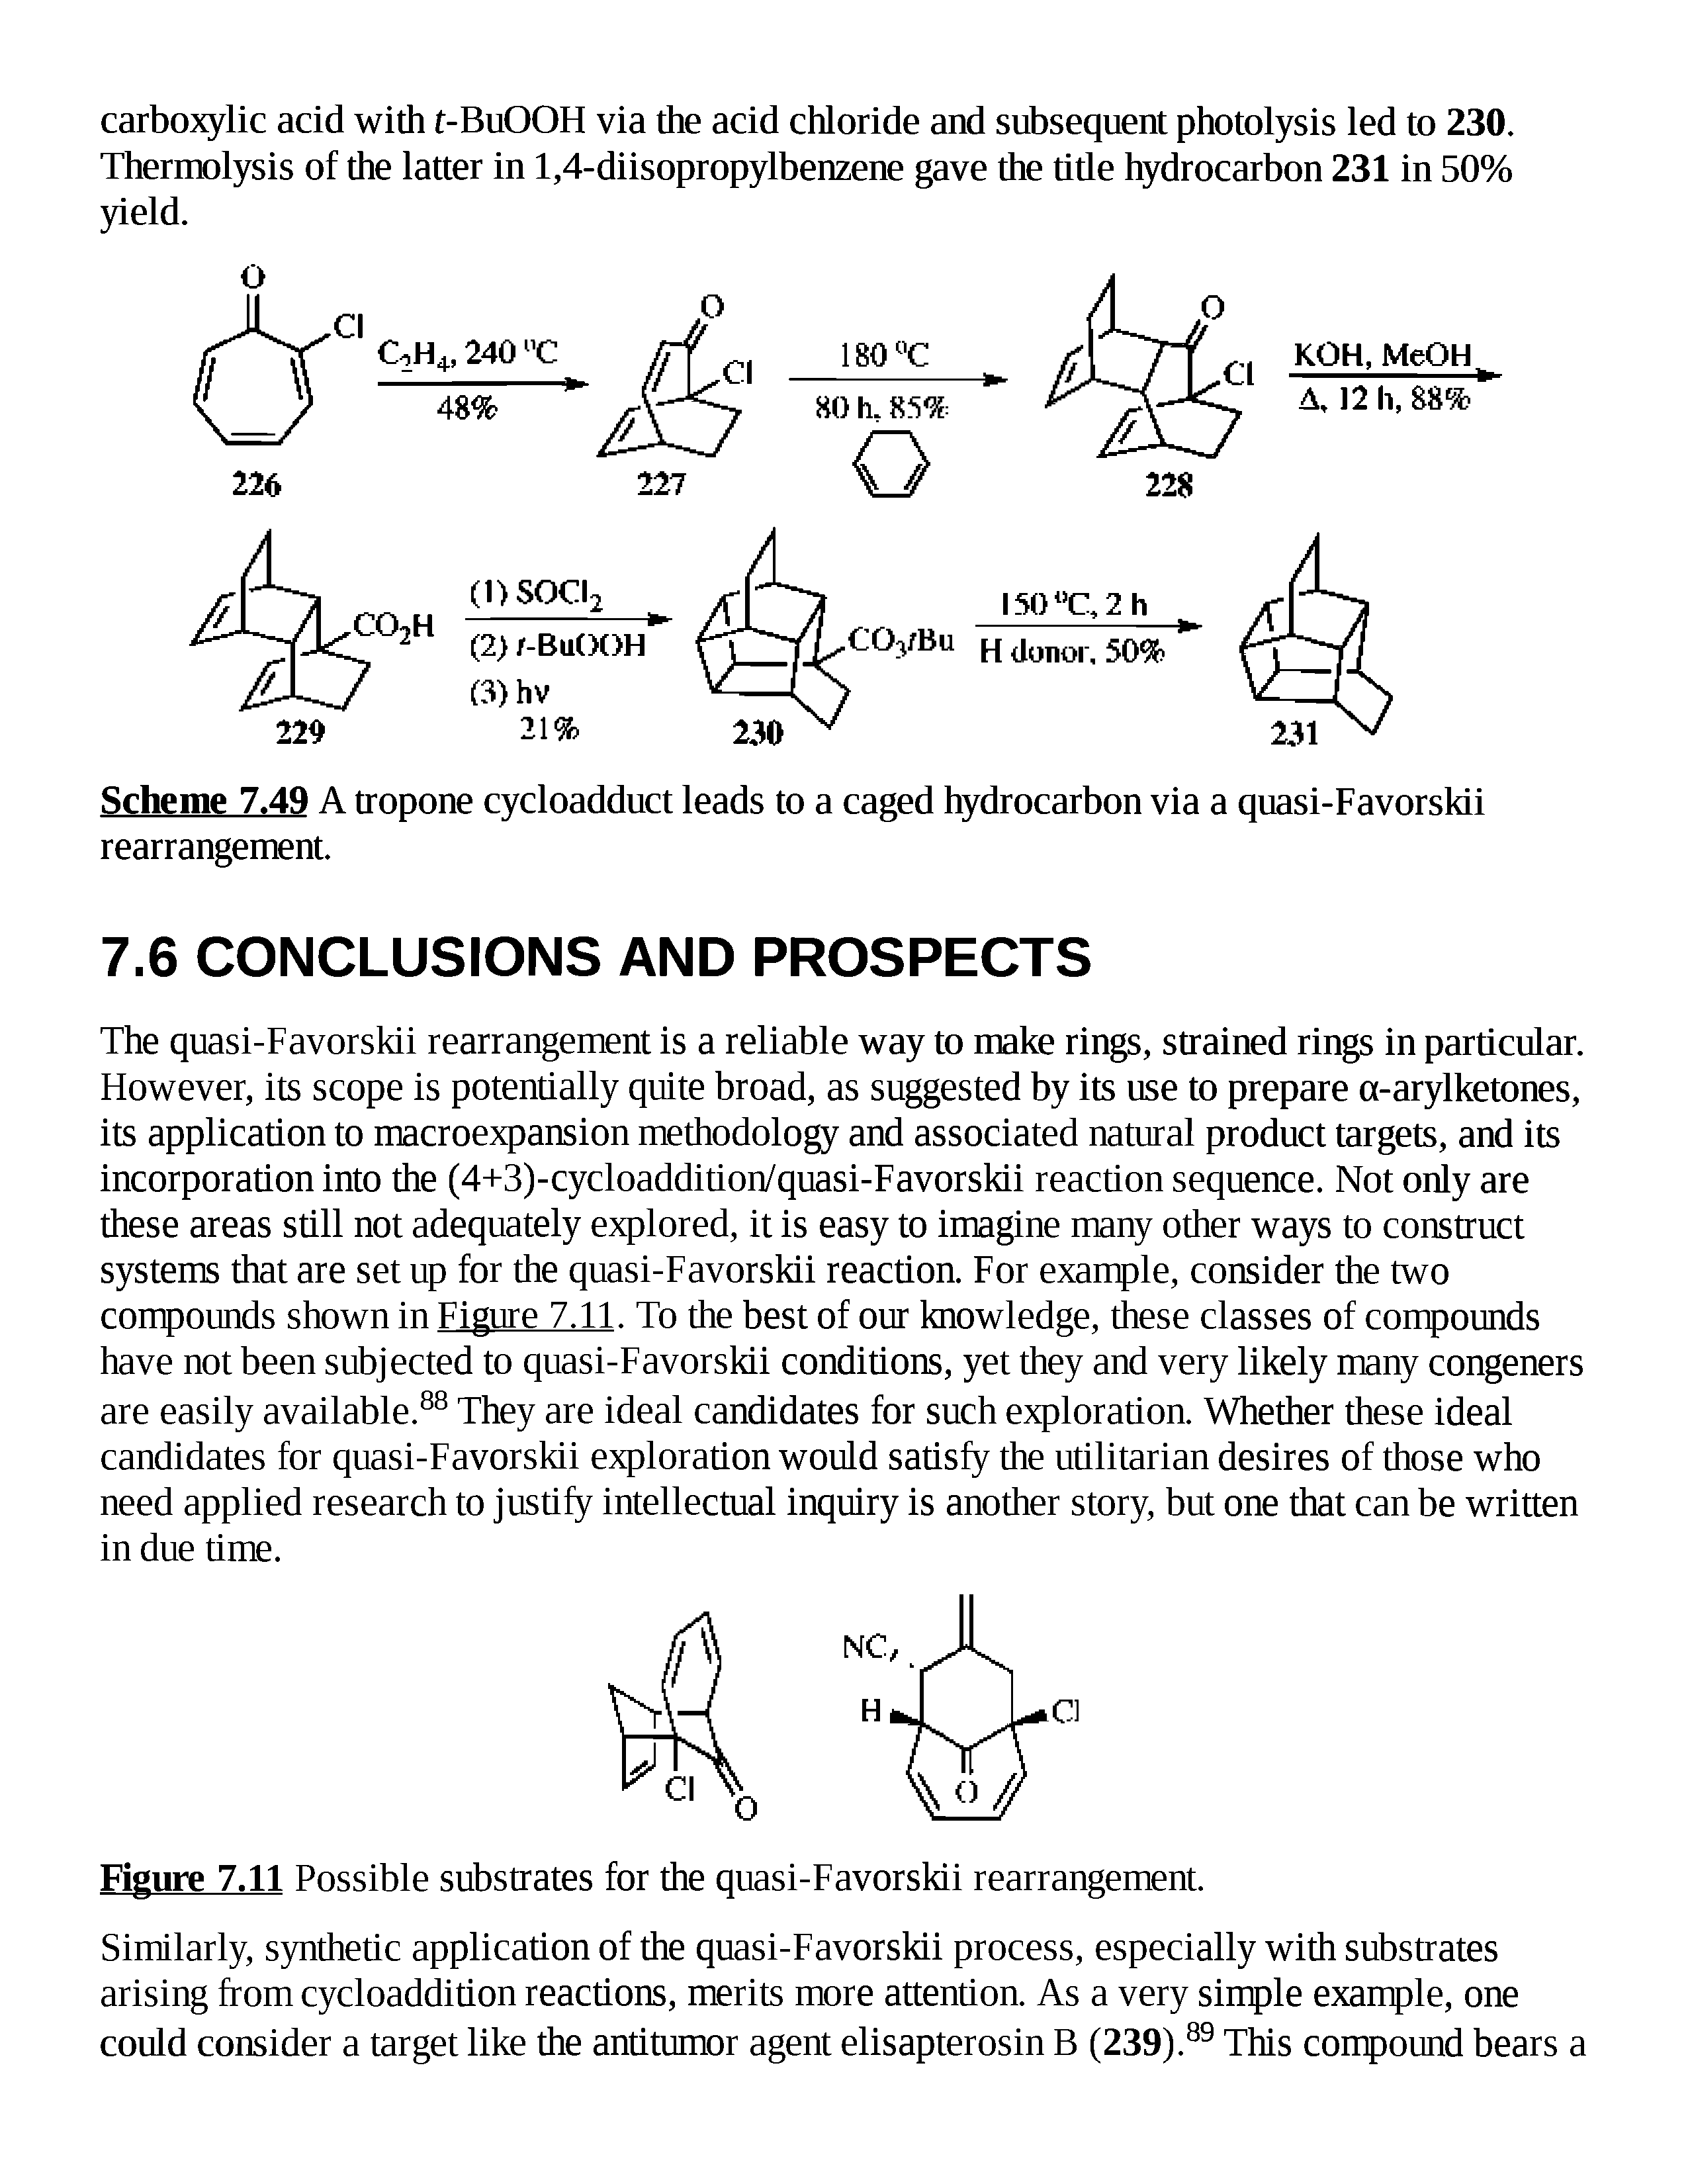 Figure 7.11 Possible substrates for the quasi-Favorskii rearrangement.